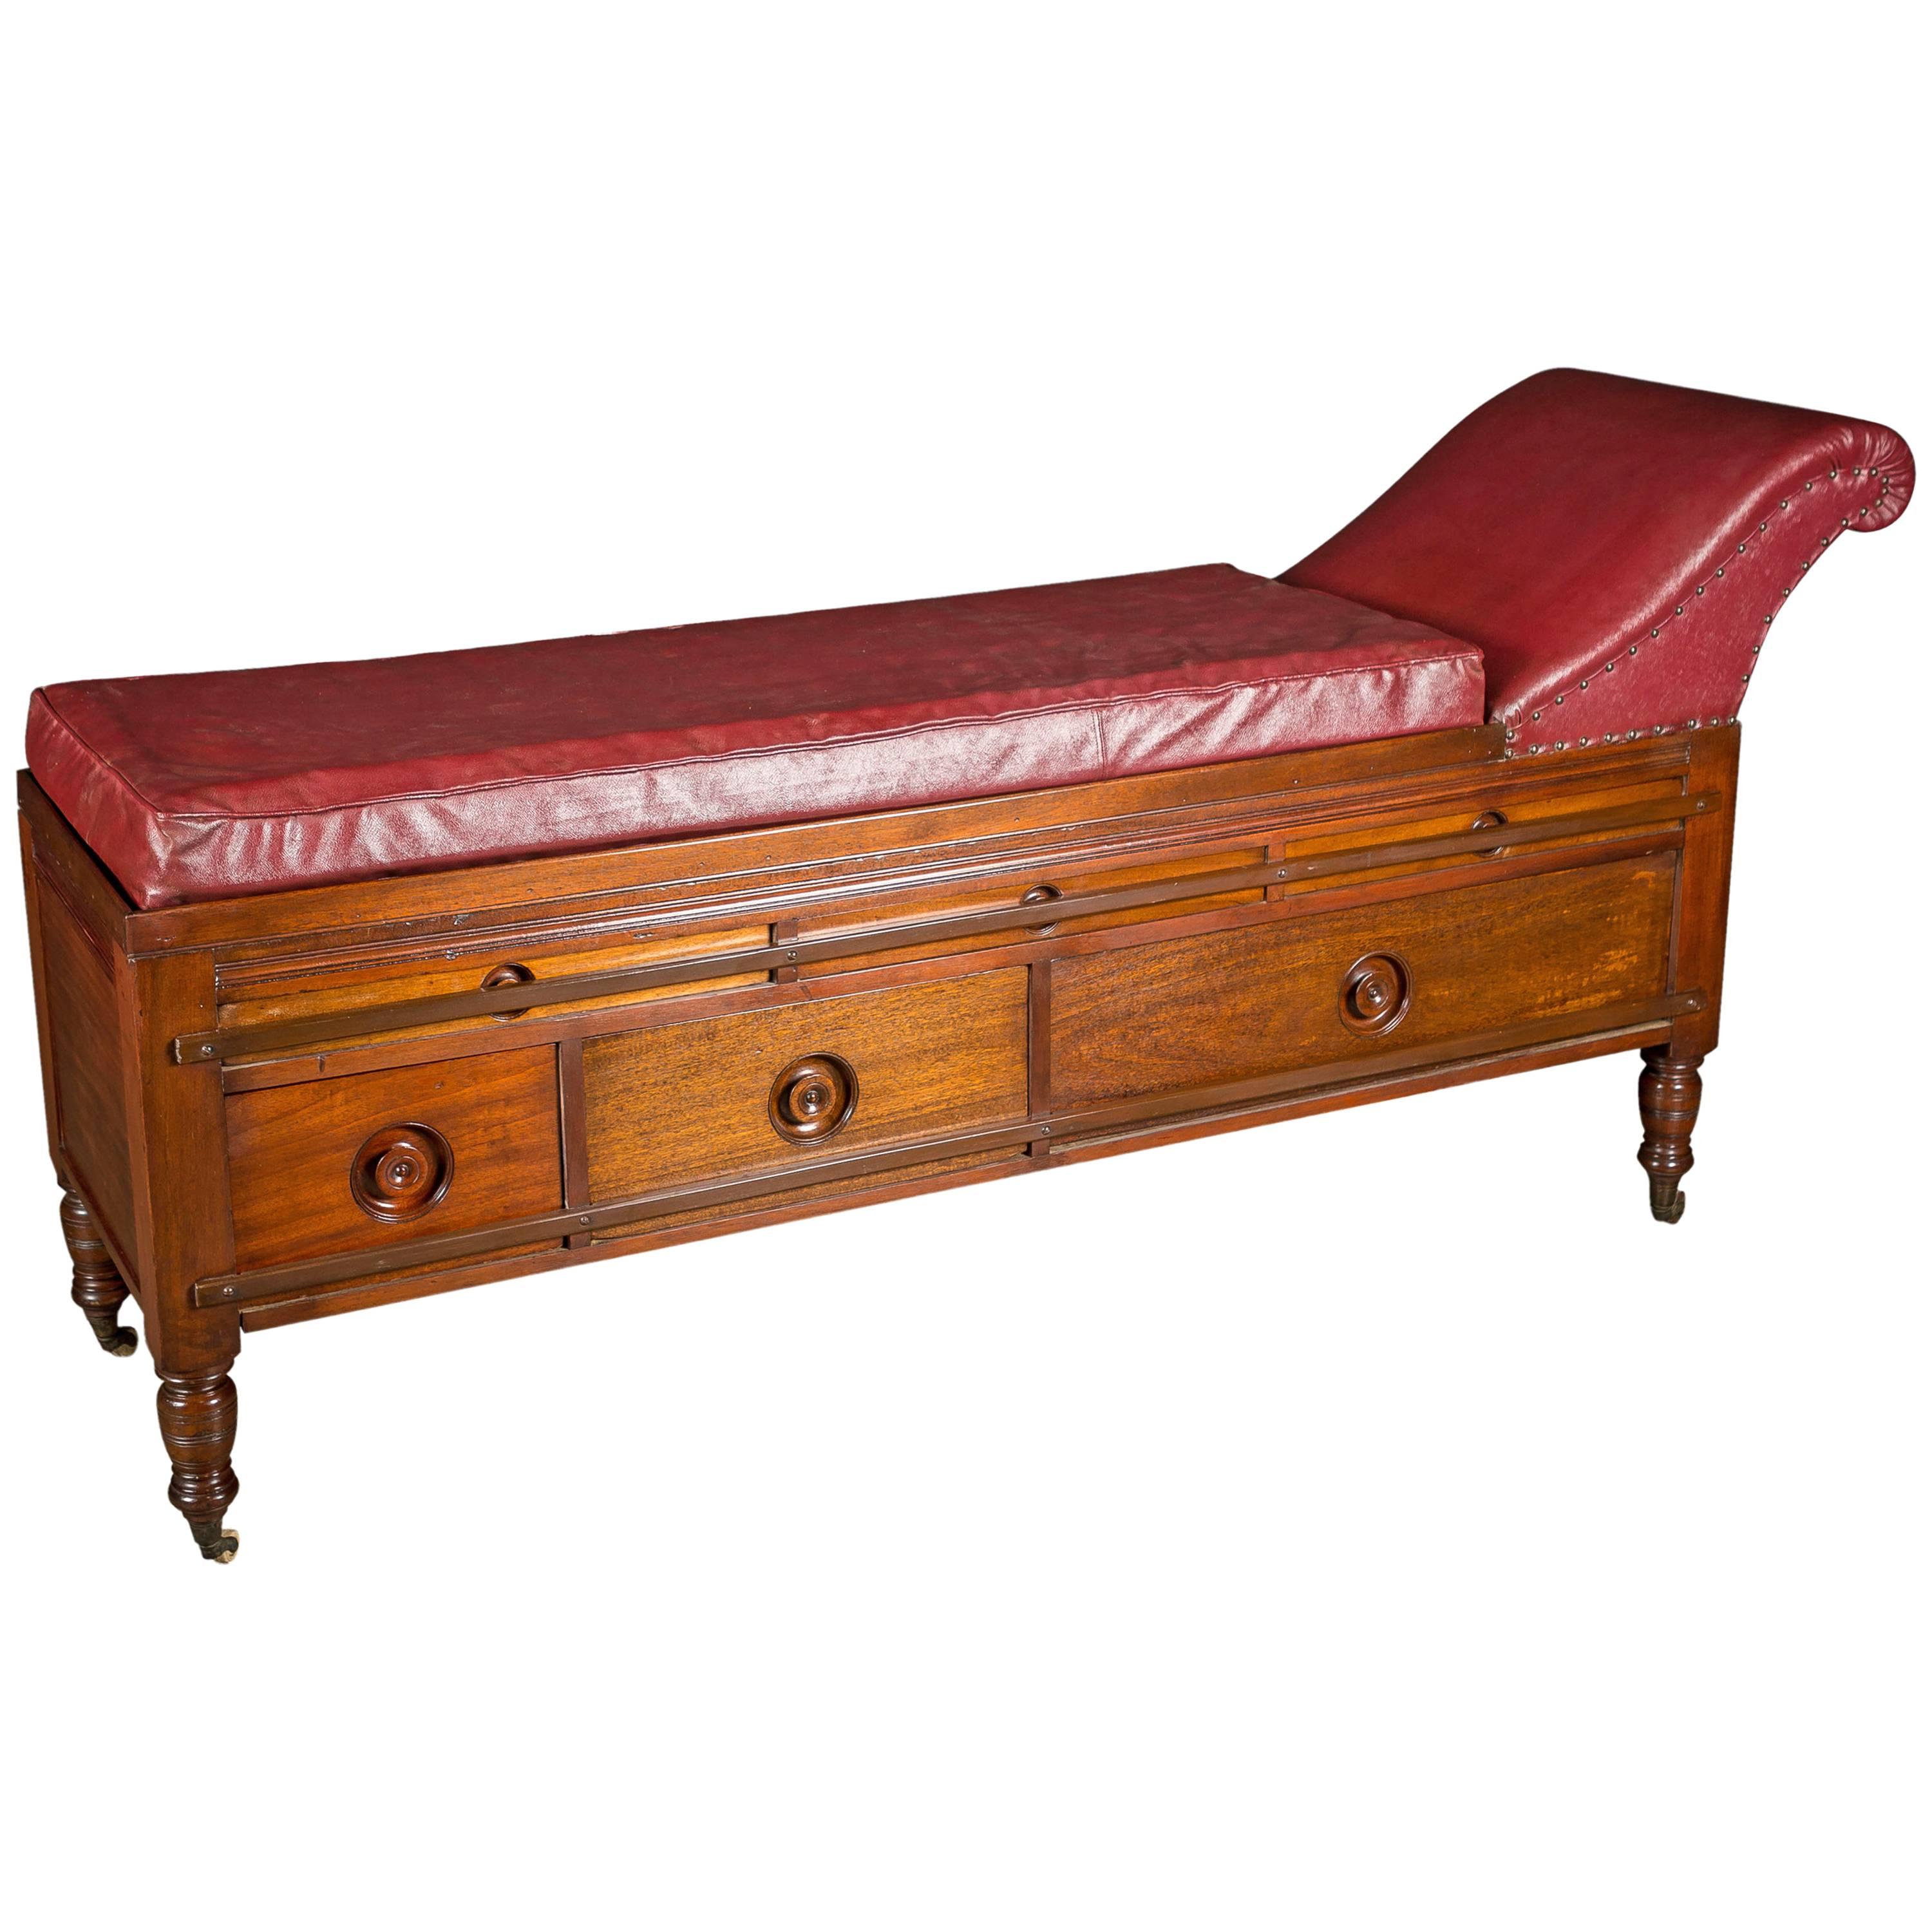 19th Century Mahogany Therapists Couch with Drawers and Inset Handles For Sale